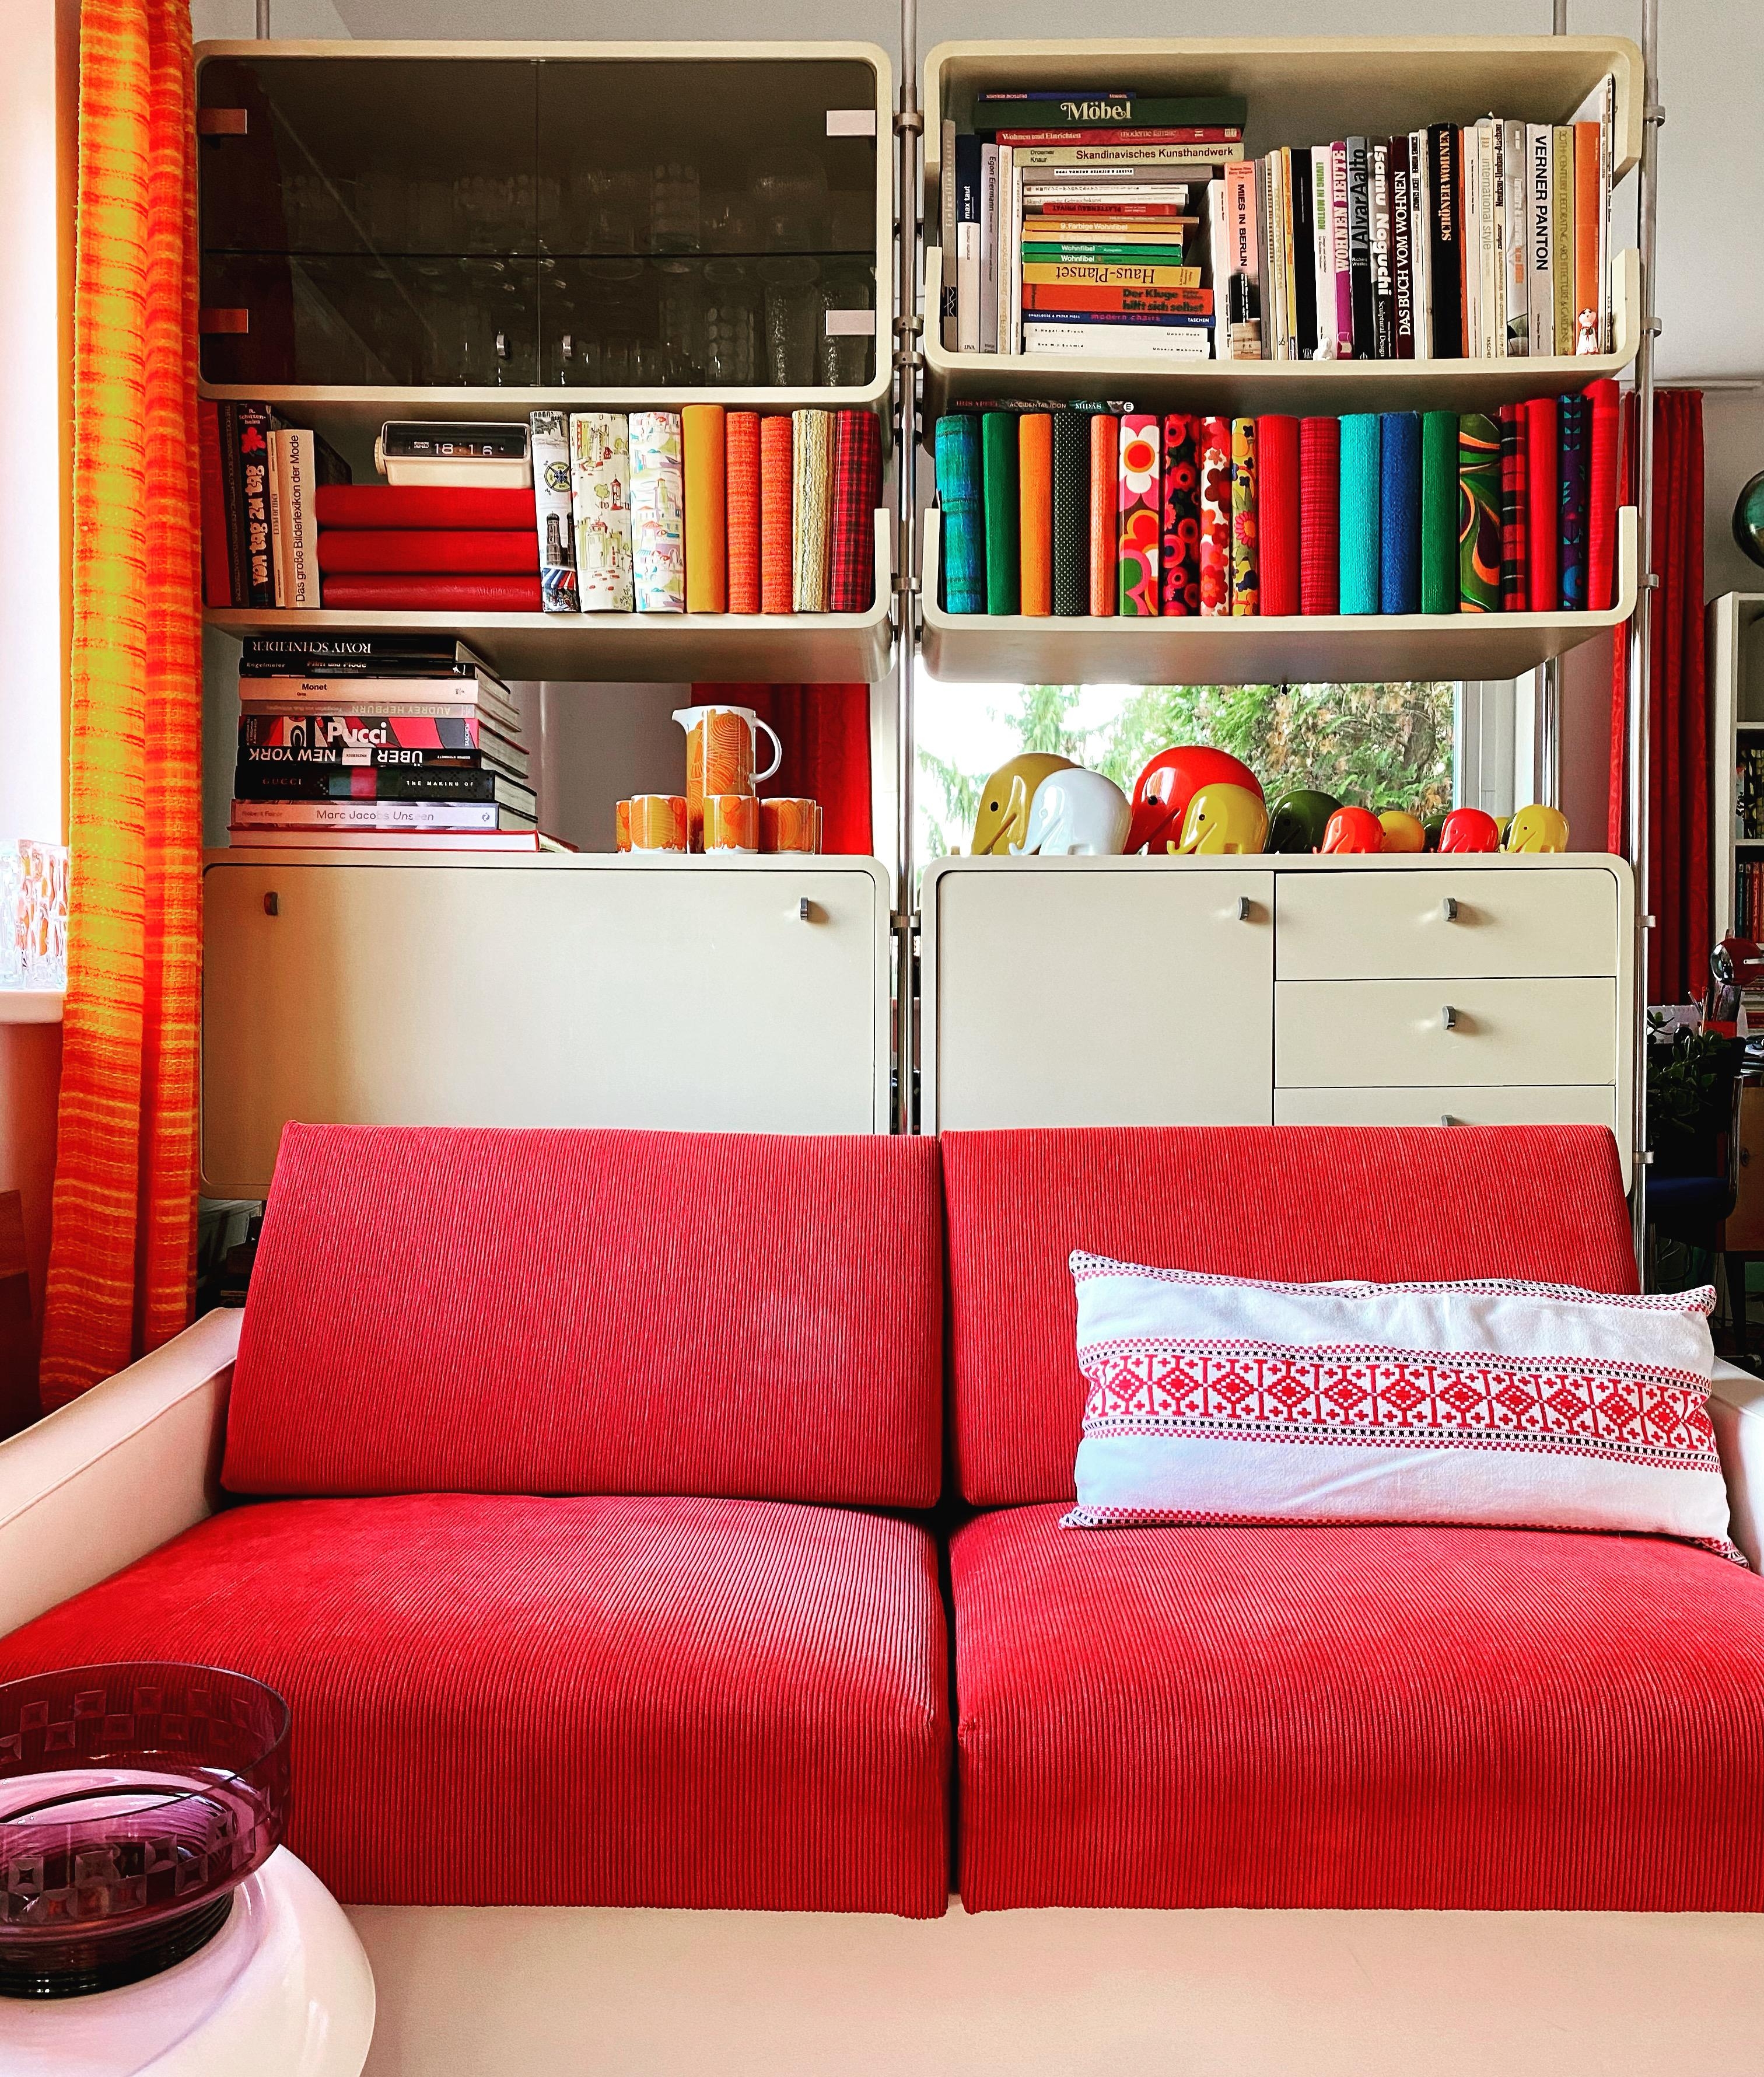 #colourful #couch #couchstyle #books #interior